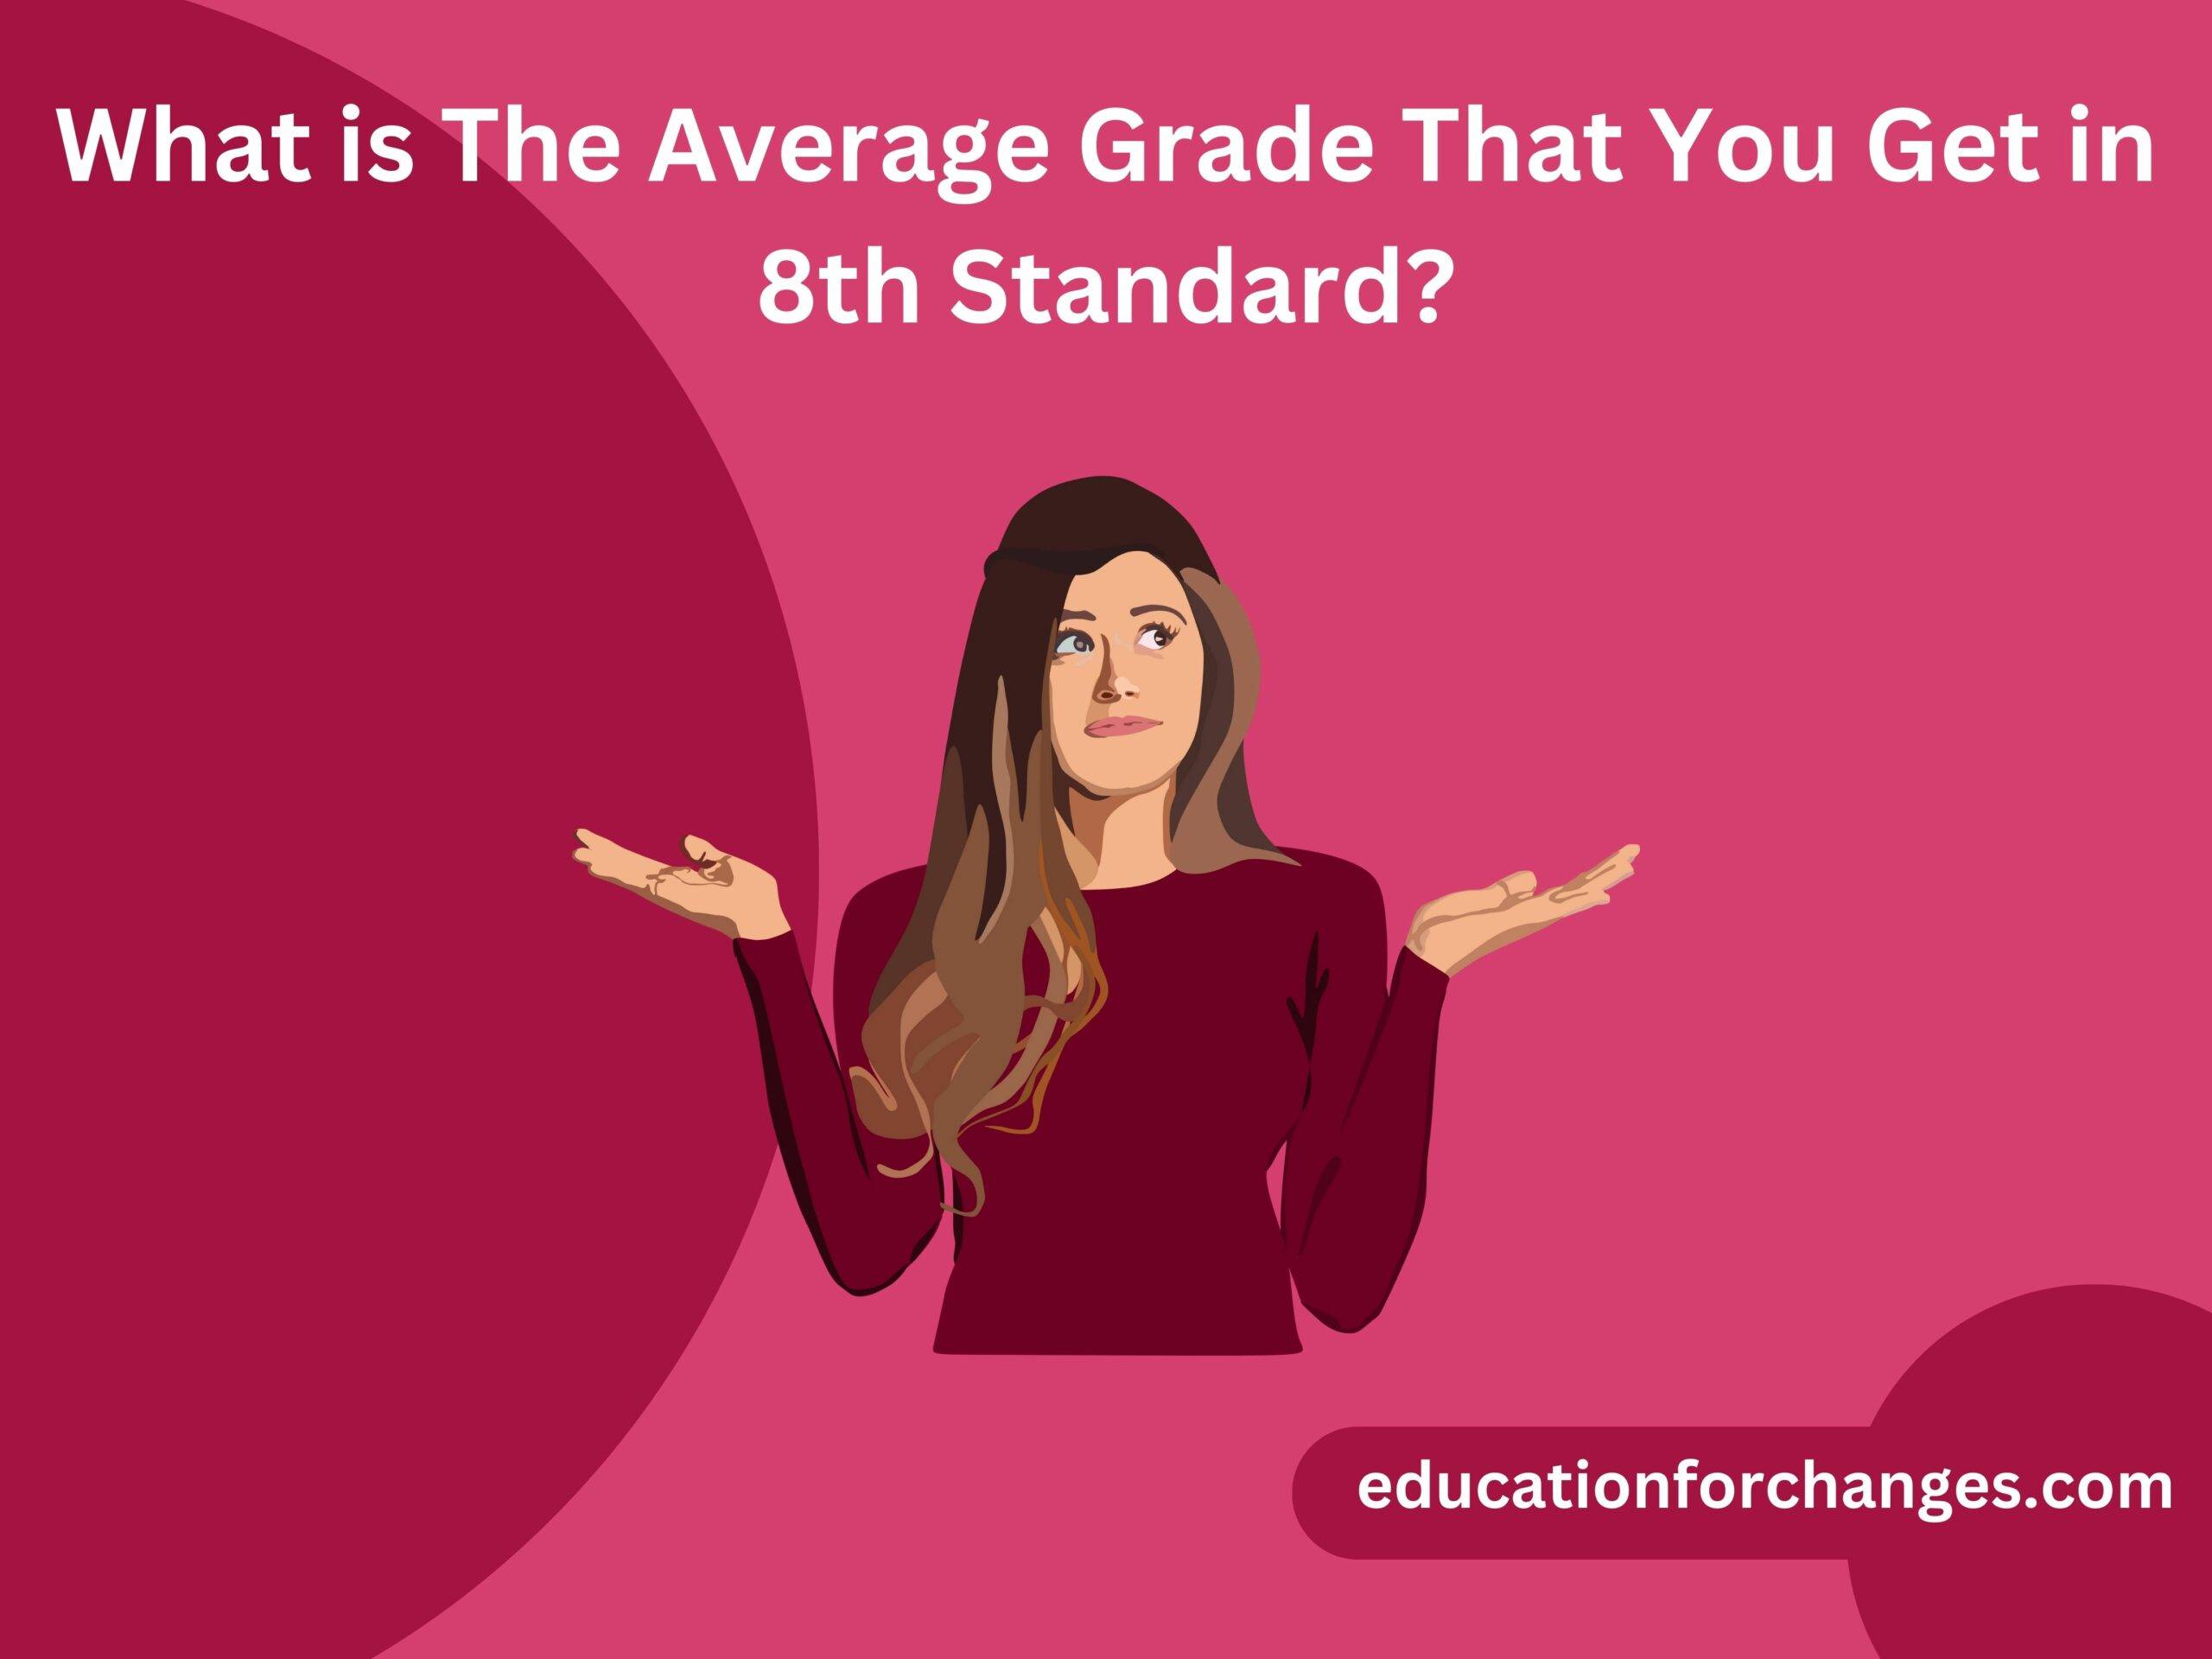 What is The Average Grade That You Get in 8th Standard